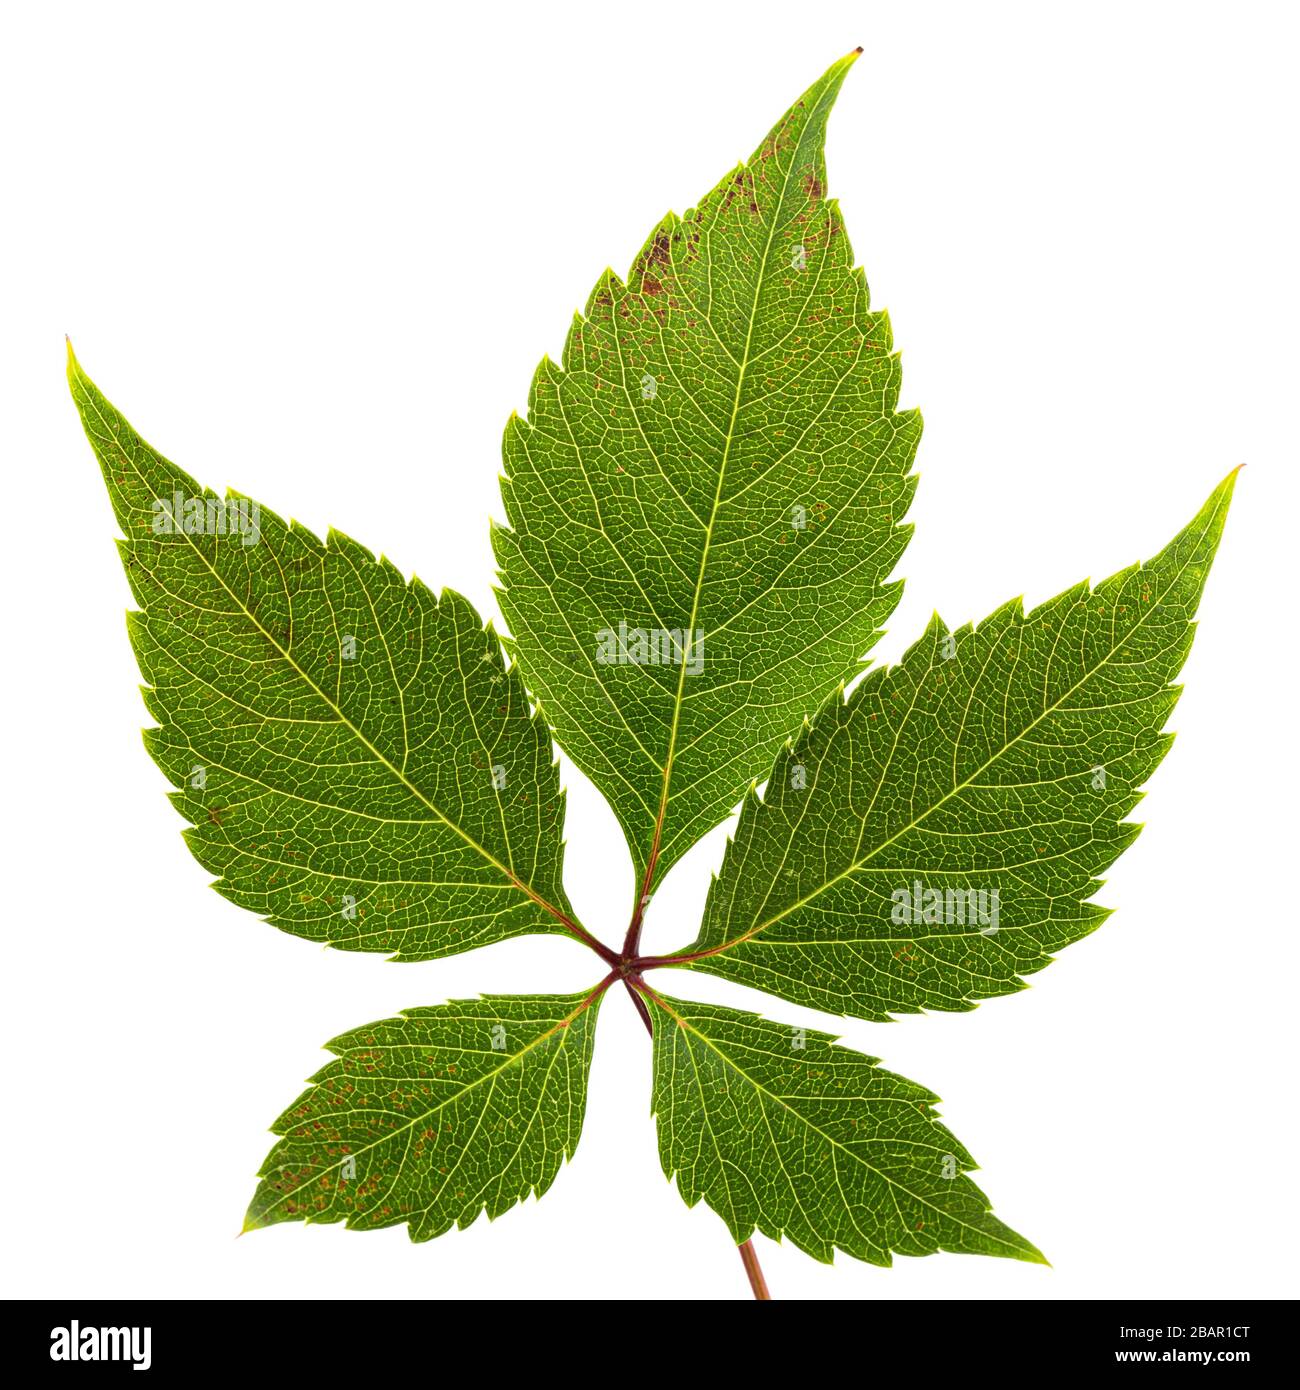 Green leaf of girlish grapes (lat. Parthenocissus quinquefolia),  isolated on white background Stock Photo